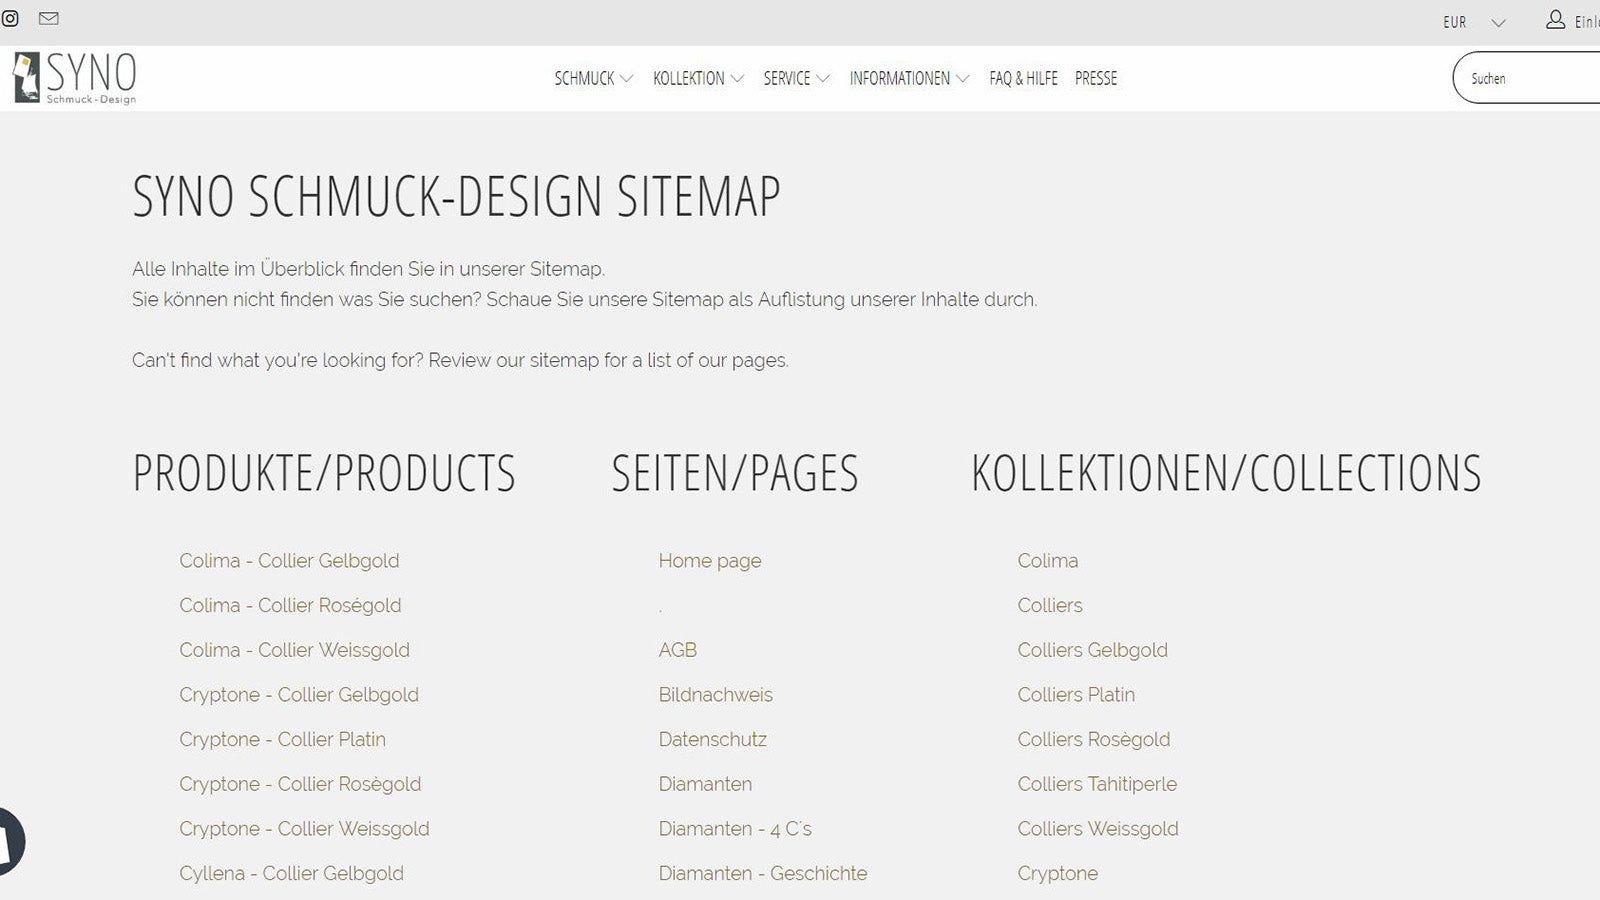 Multilingual sitemap page